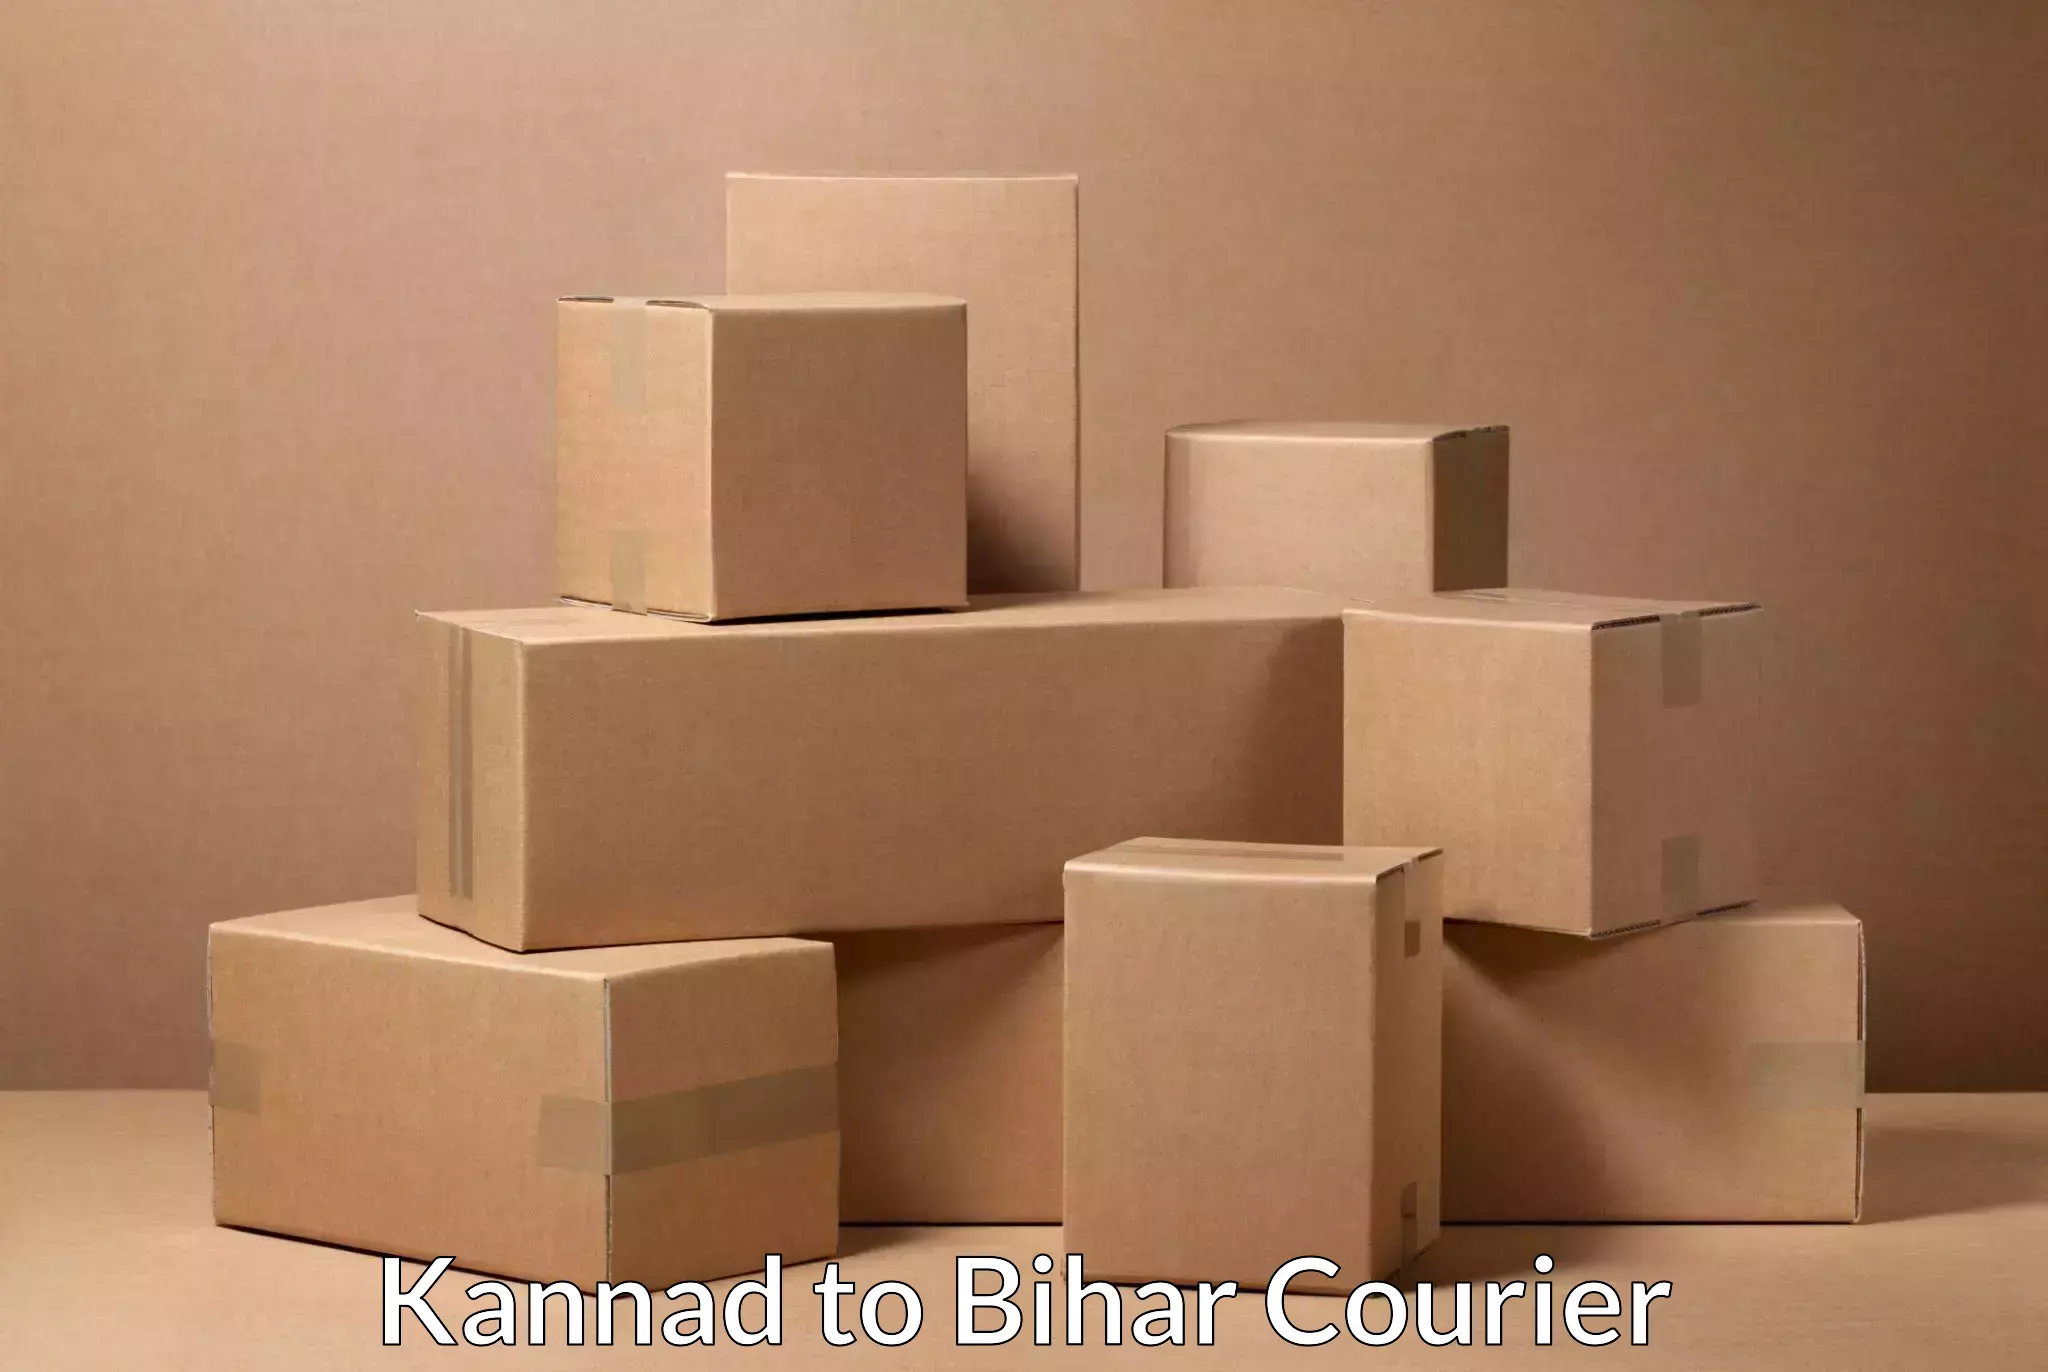 Residential courier service Kannad to Alamnagar